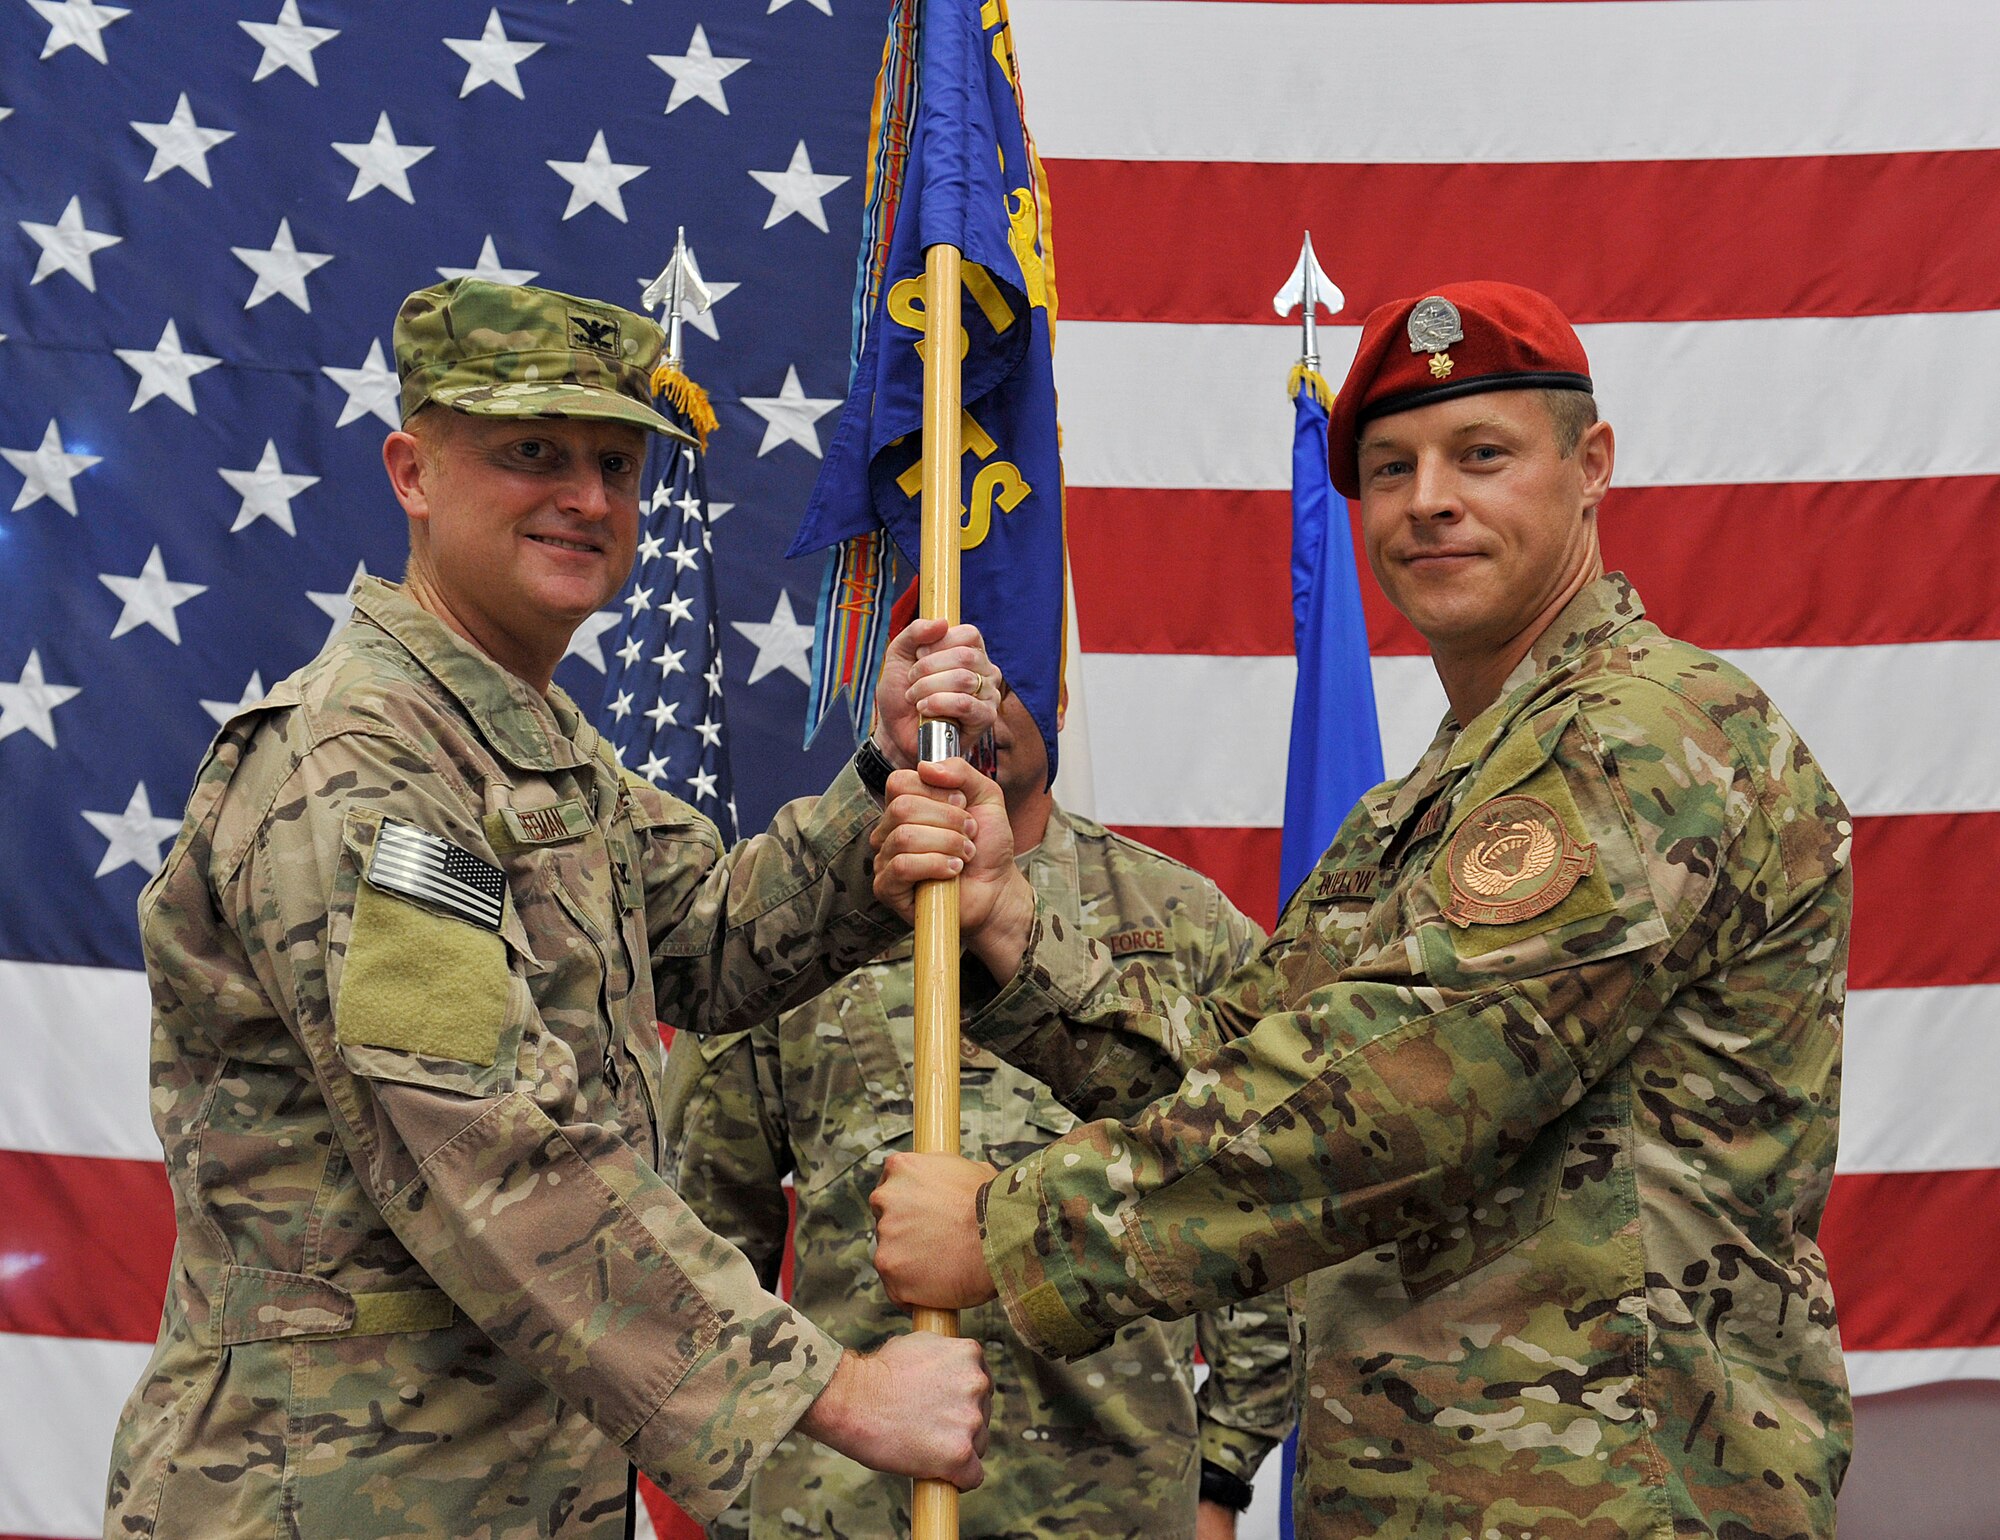 U.S. Air Force Col. William Freeman, 353rd Special Operations Group commander, passes the guidon to U.S. Air Force Maj. Joel Buelow, 320th Special Tactics Squadron commander, during the 320th STS change of command on Kadena Air Base, Japan, June 23, 2016.   (U.S. Air Force photo by Naoto Anazawa)